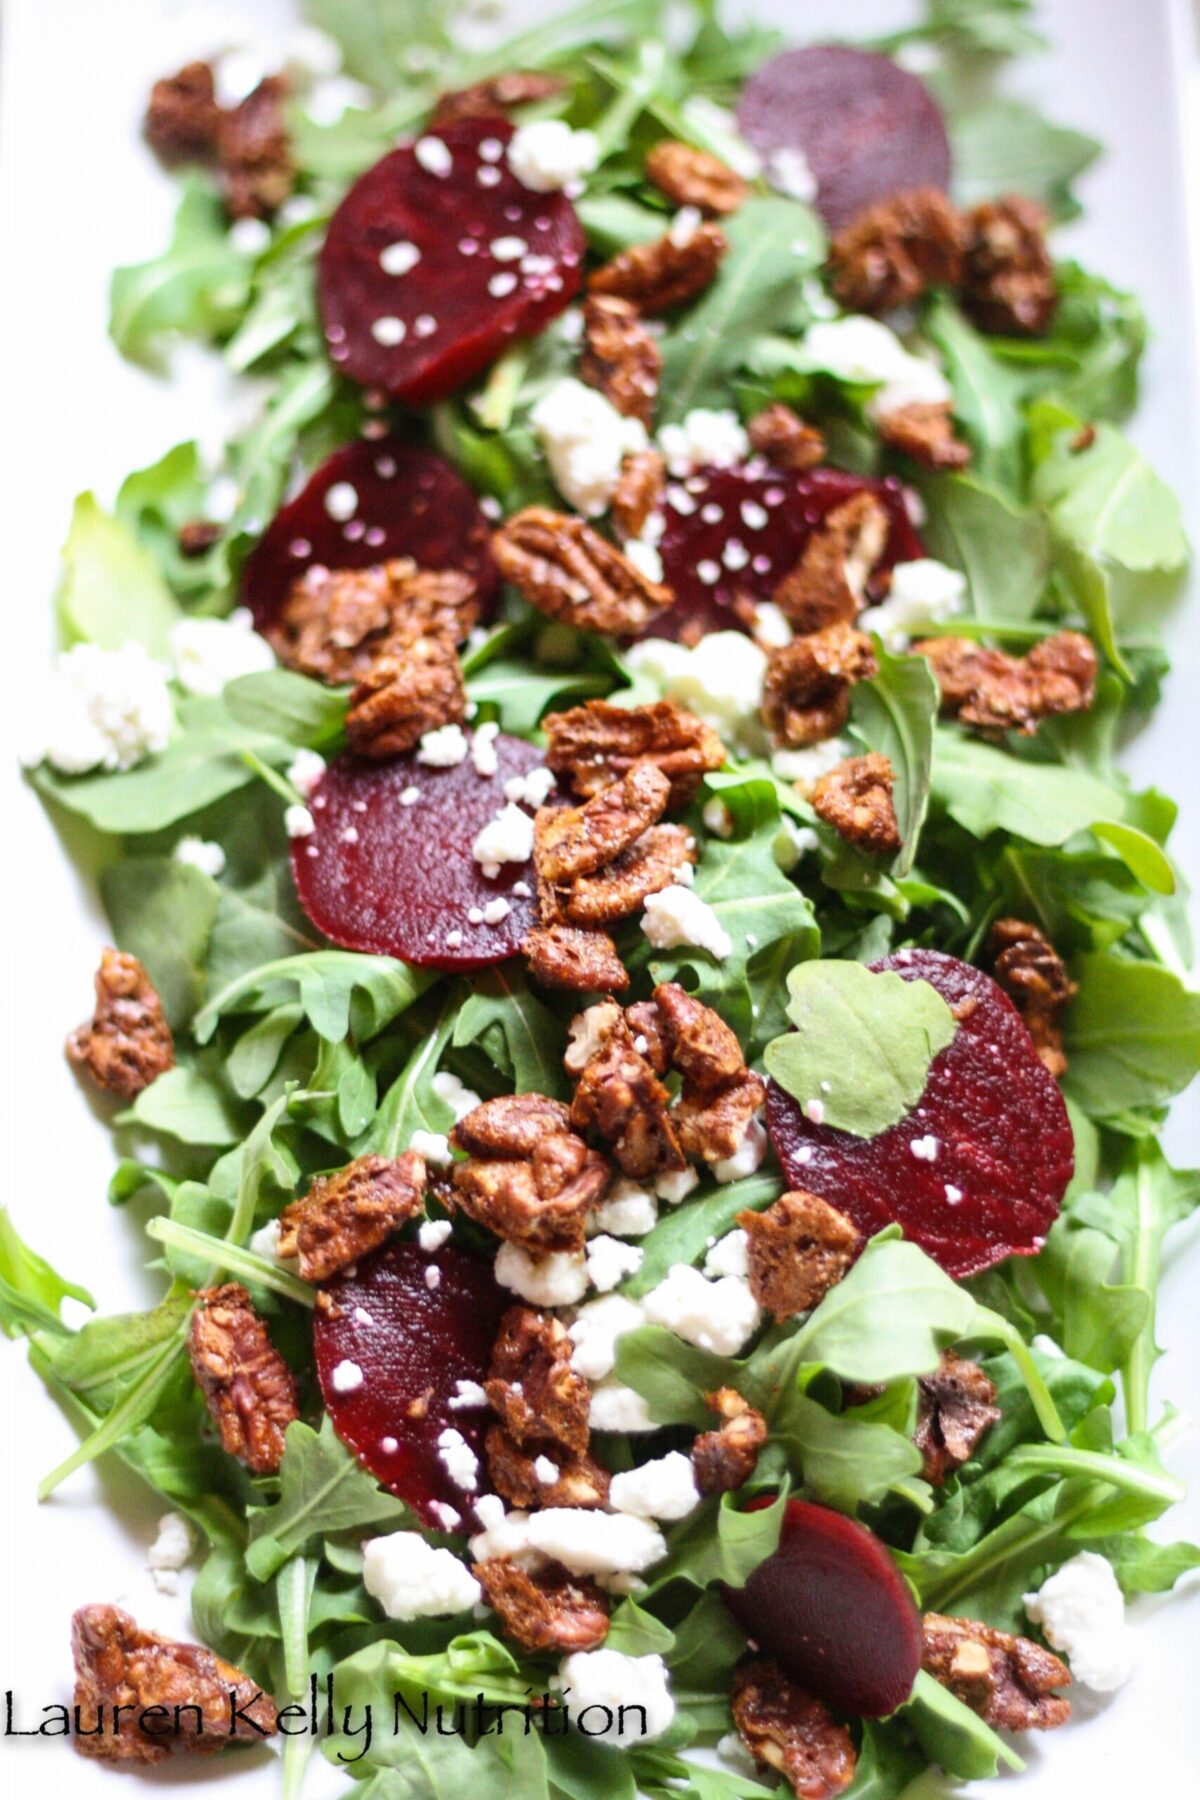 Arugula Beet Salad with Beets Candied Pecans and Gorgonzola Cheese.